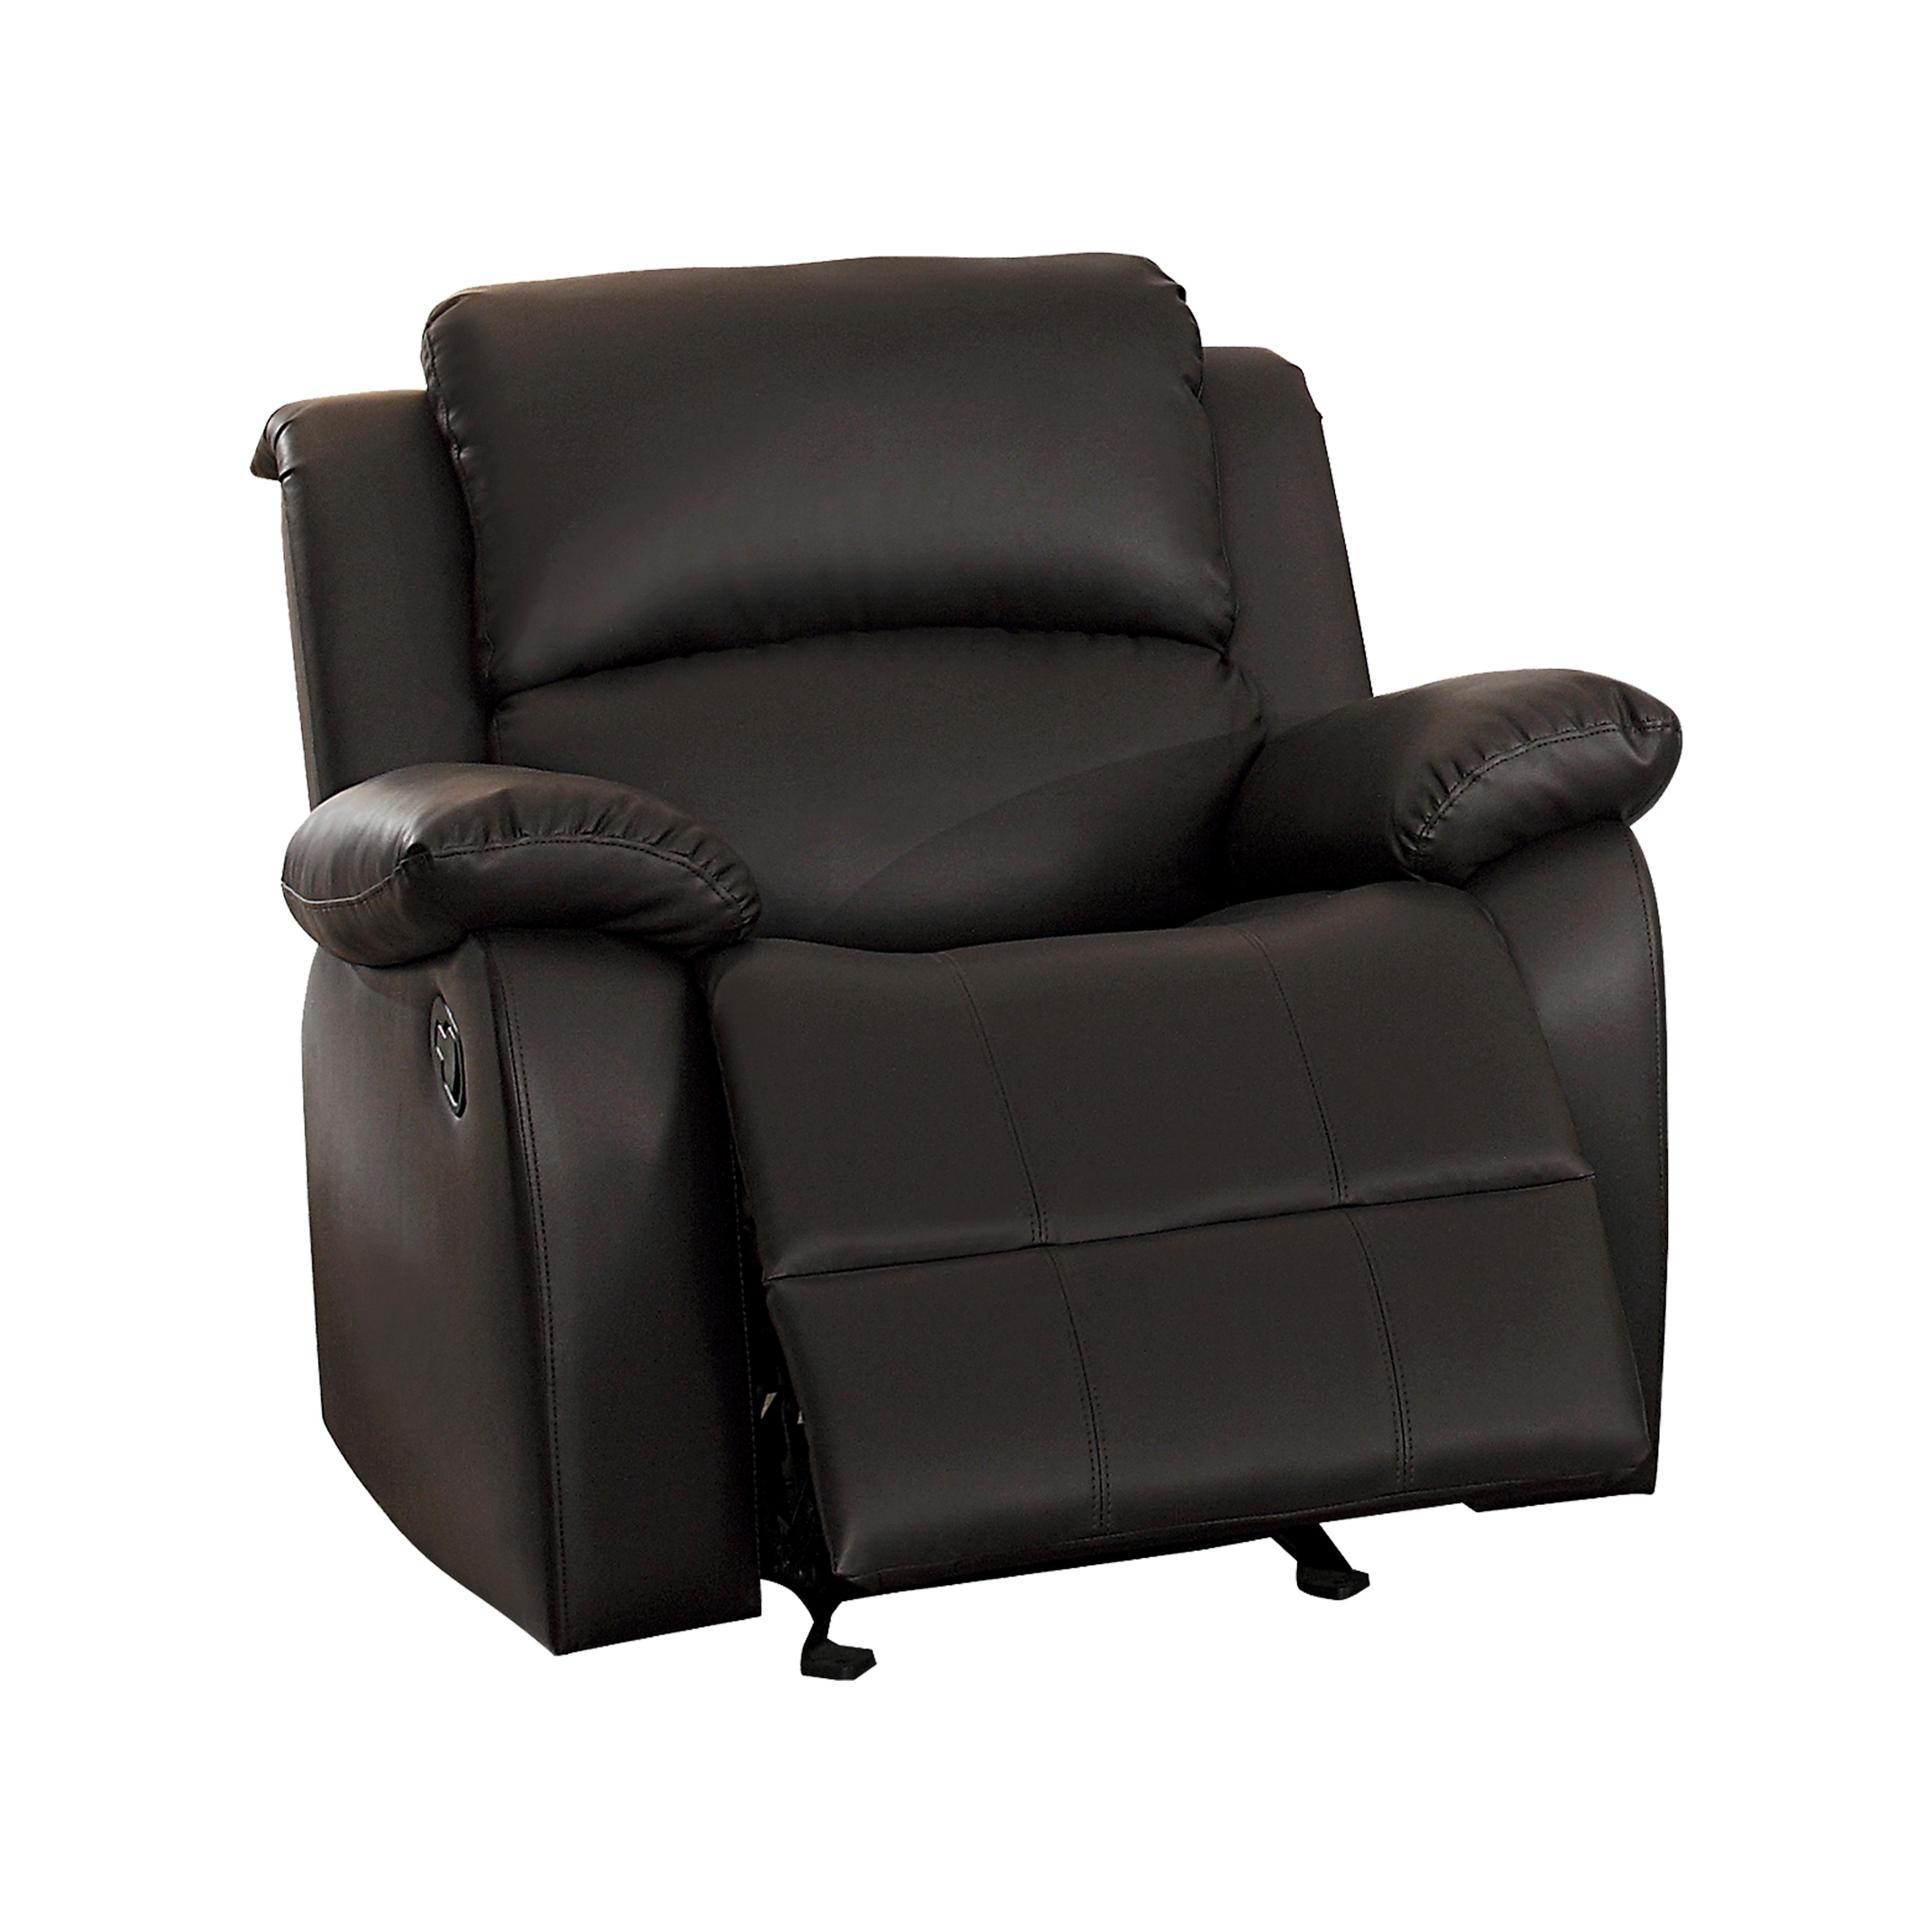 

    
Transitional Dark Brown Faux Leather Reclining Chair Homelegance 9928DBR-1 Clarkdale
